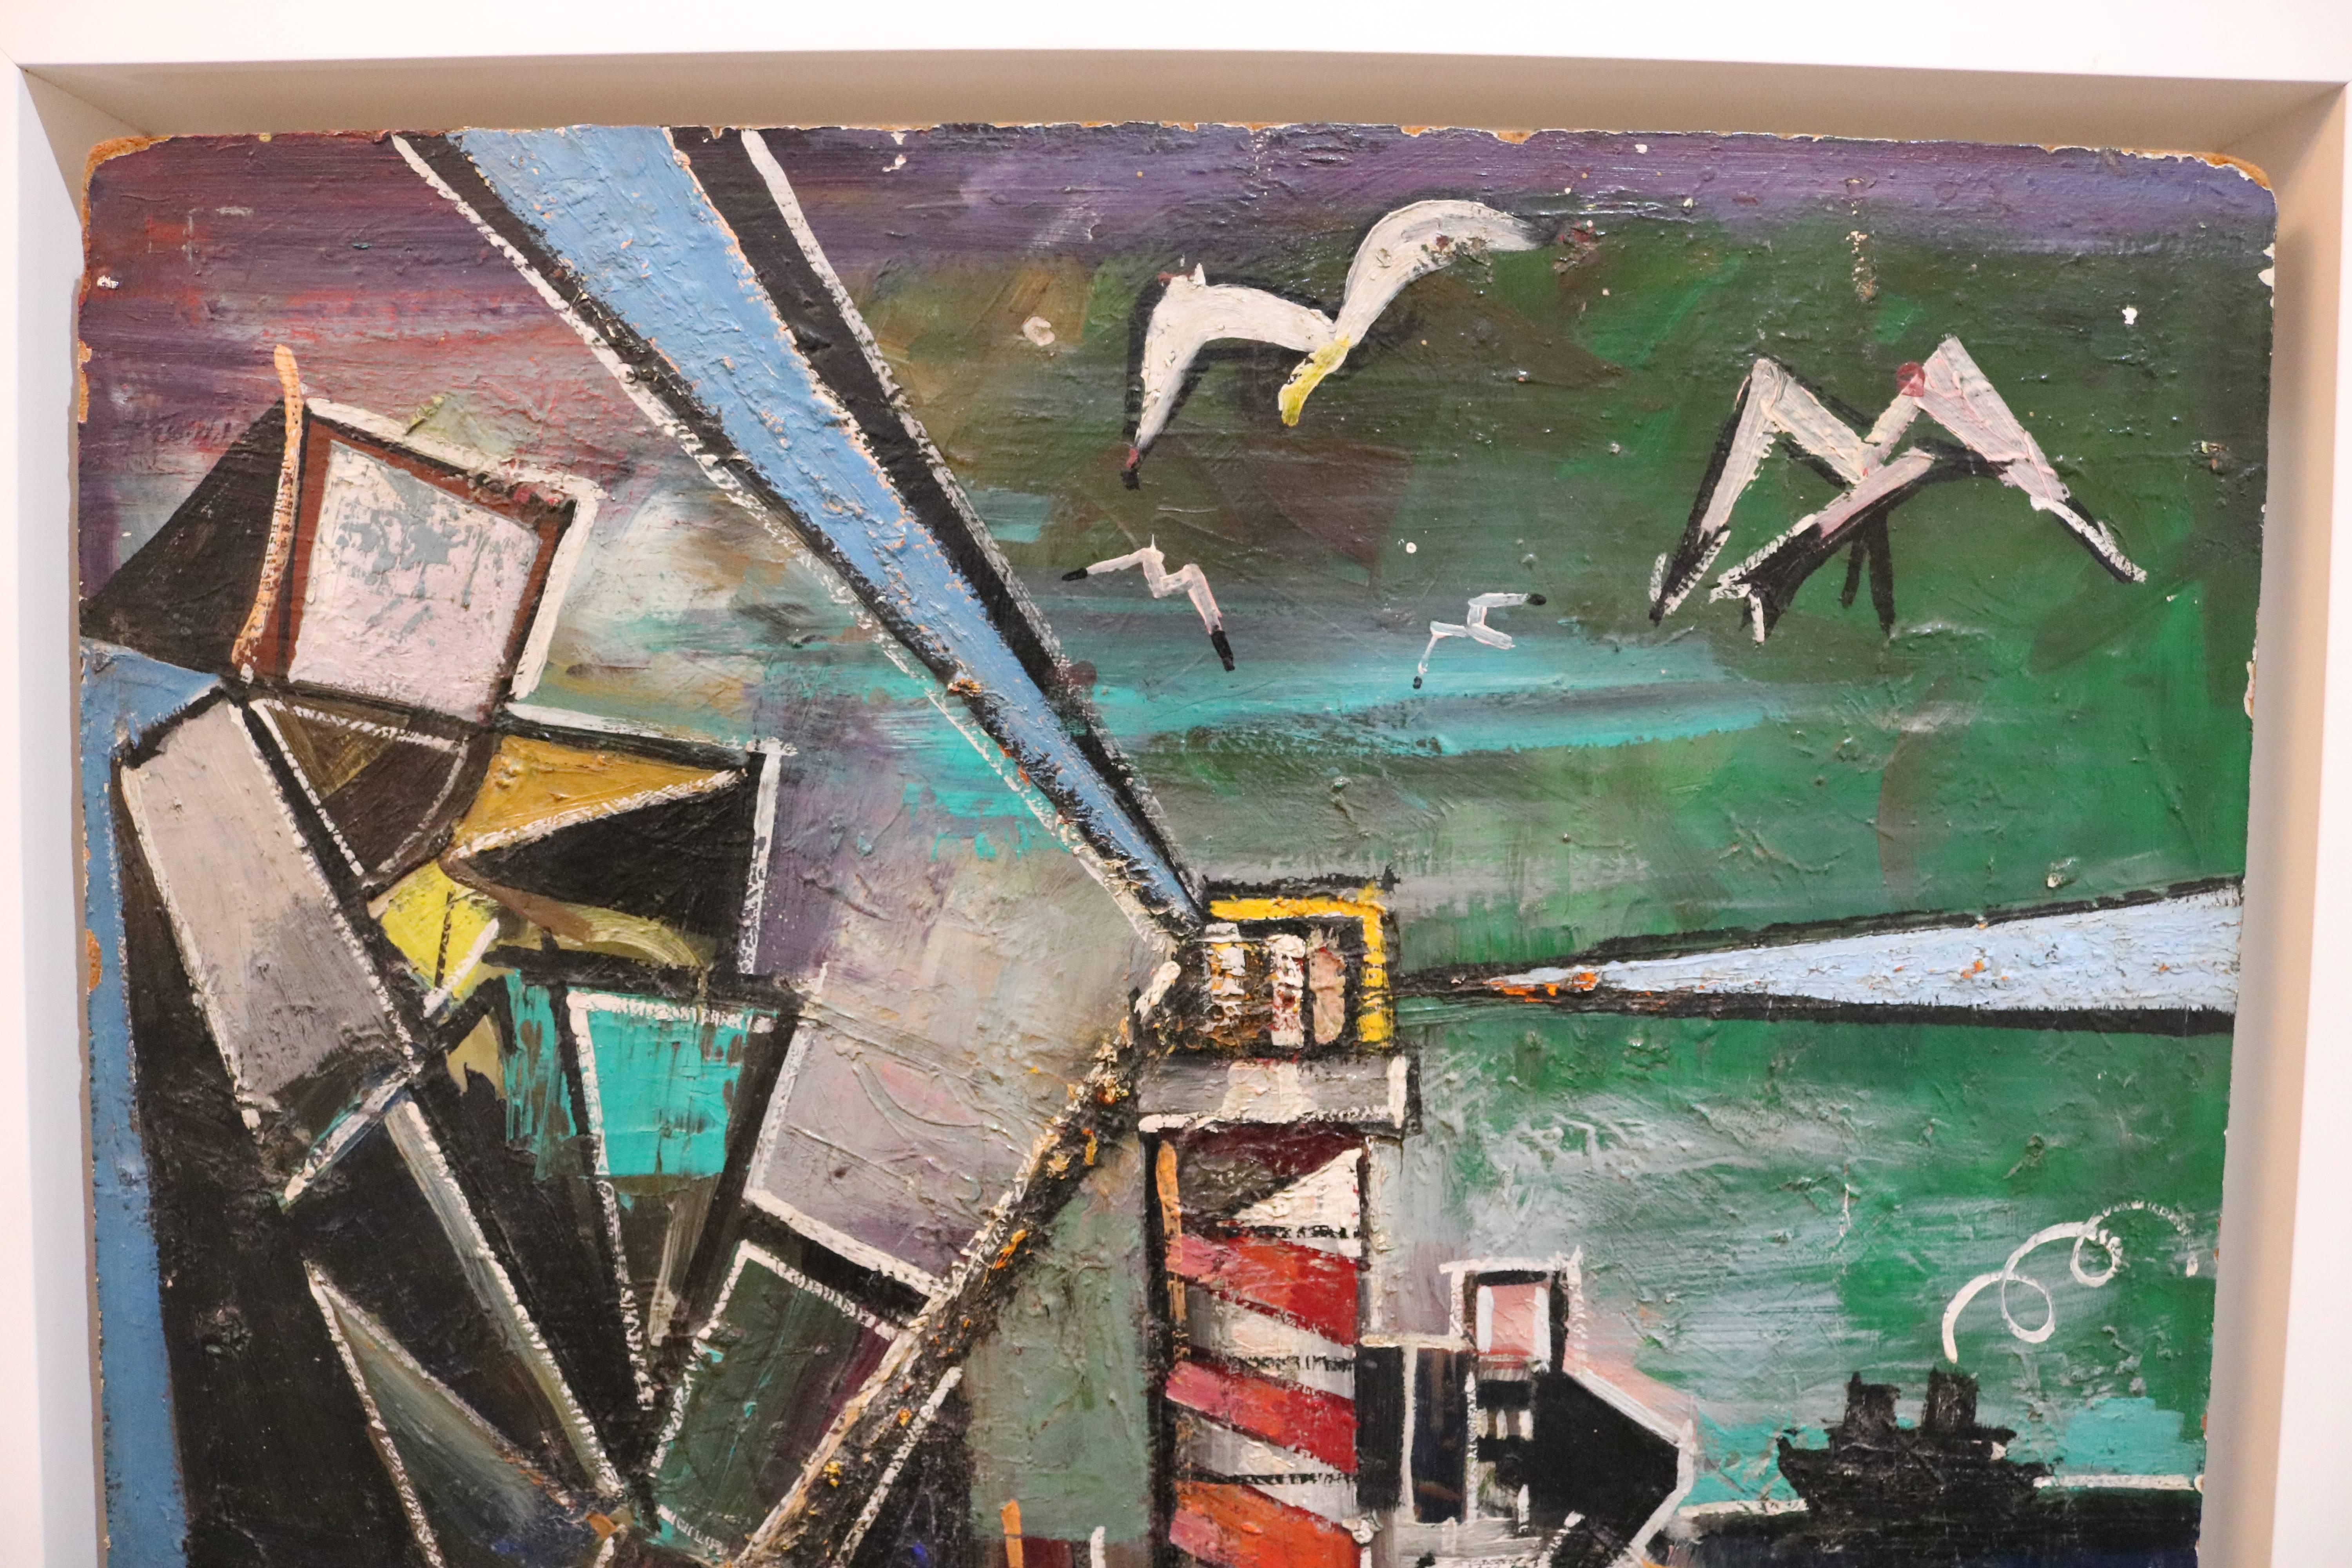 This colorful acrylic on board painting dates from the early part of the 20th century and has elements of the Art Deco and Cubist period. Here the painter Hendricks has captured the movement and natural rhythm of the open sea and harbour. 

Note: